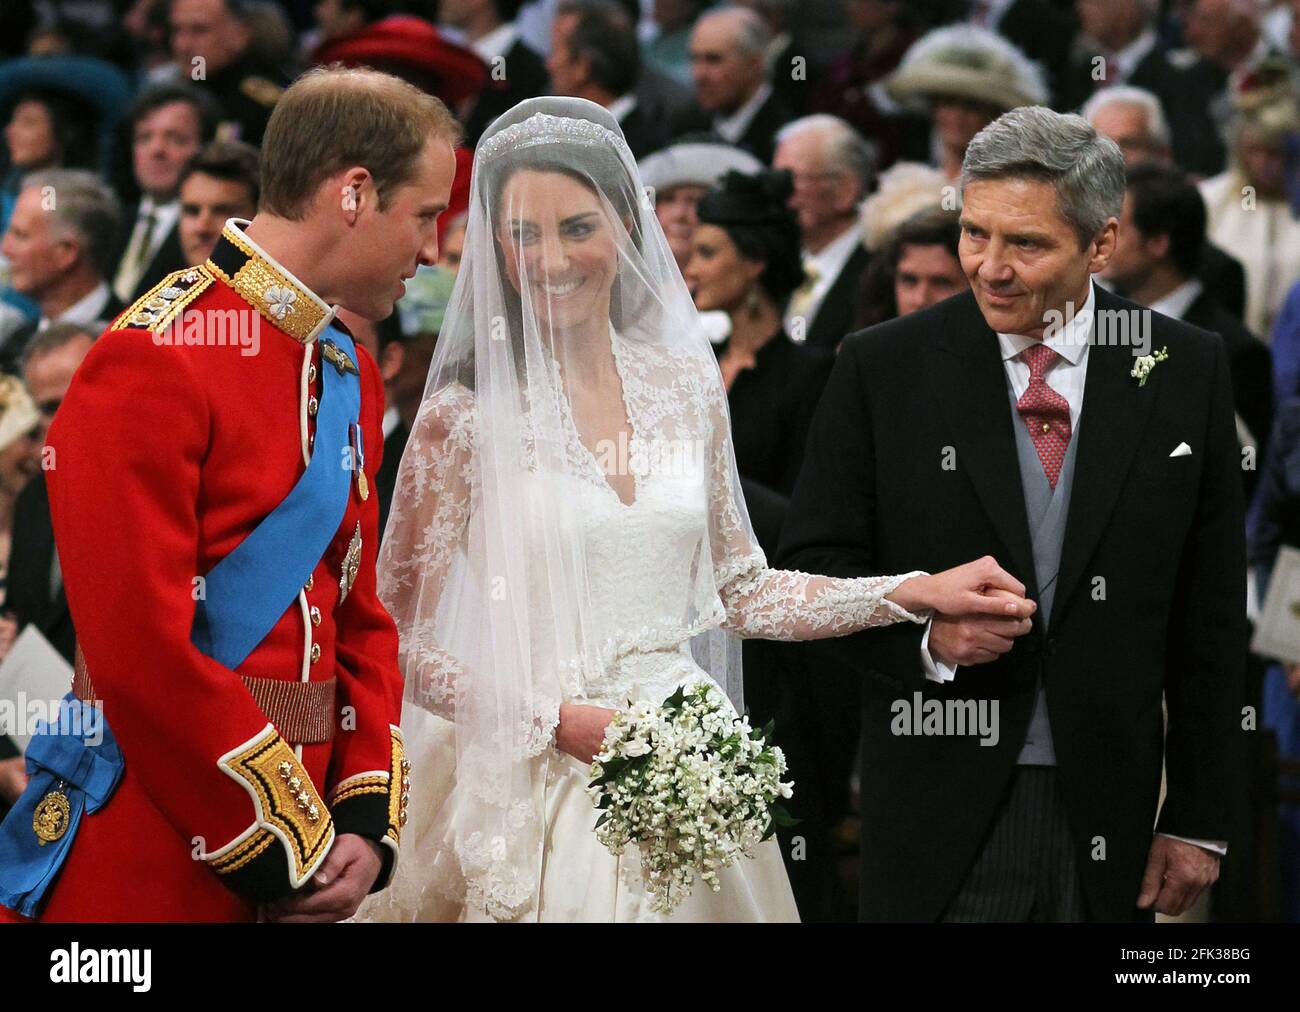 File photo dated 29/04/11 of Prince William and Kate Middleton with her father Michael Middleton at Westminster Abbey, London. The Duchess of Cambridge will have spent a decade as an HRH when she and the Duke of Cambridge mark their 10th wedding anniversary on Thursday. Issue date: Wednesday April 28, 2021. Stock Photo